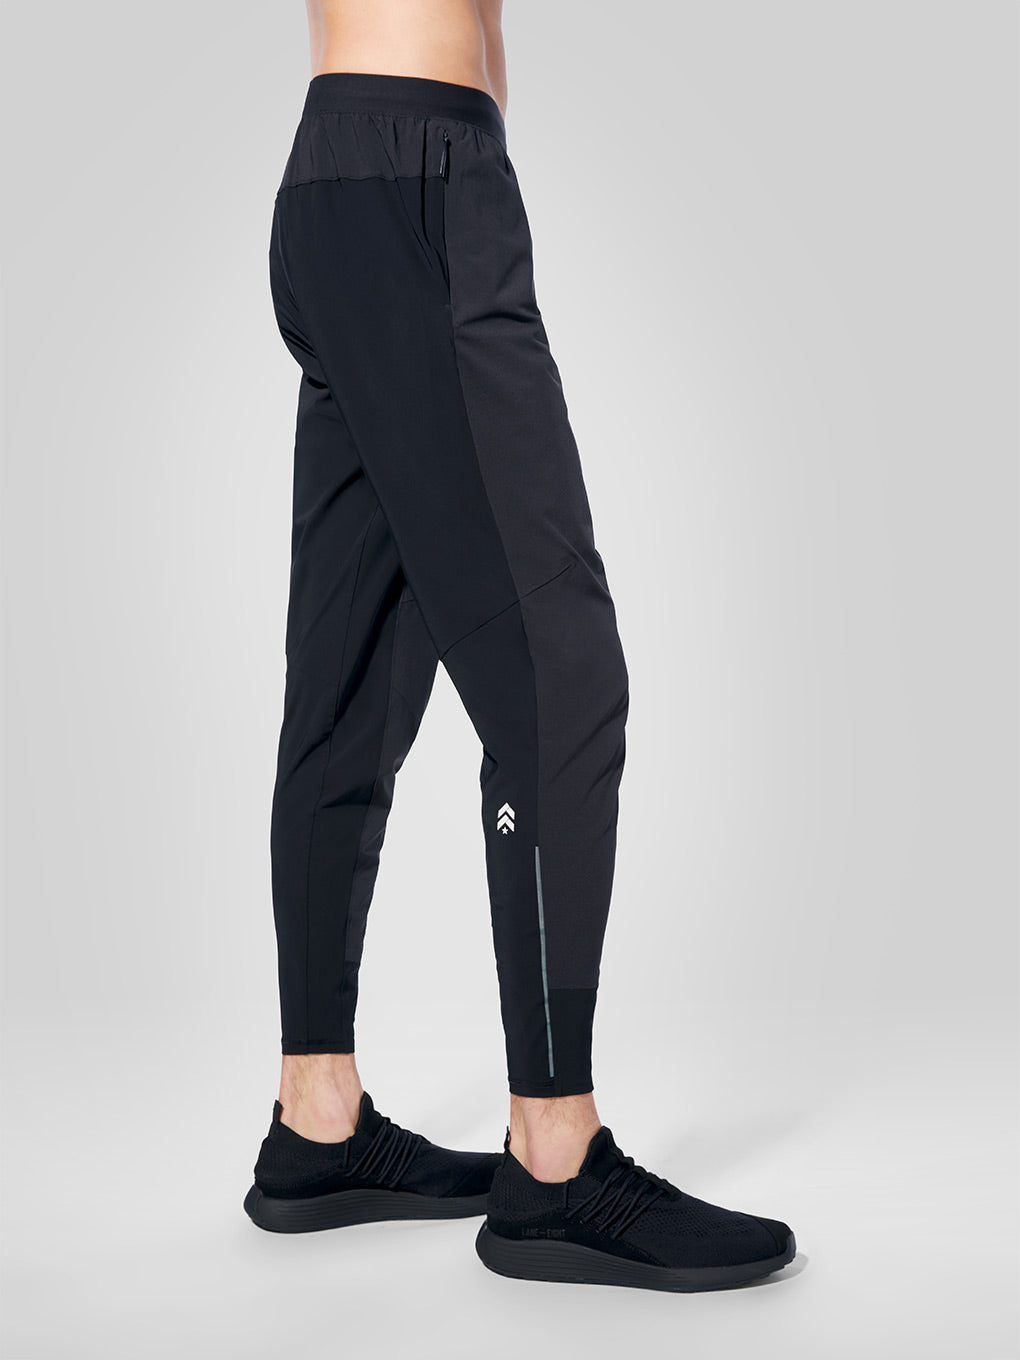 Surge Hybrid Pant 31 *Tall Online Only